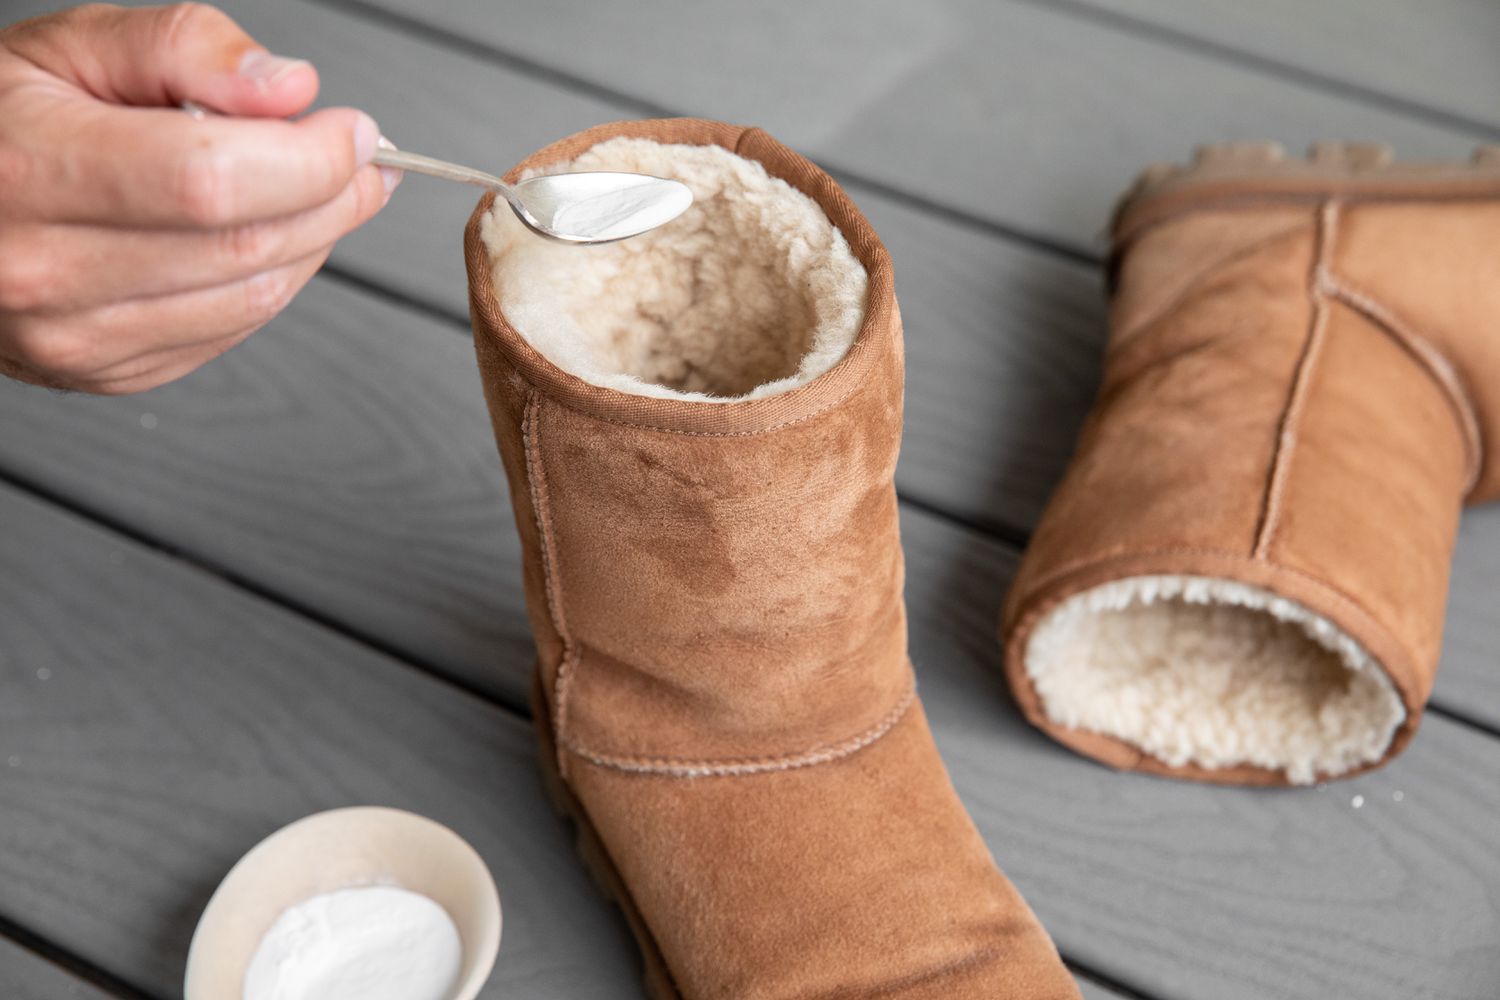 Someone spooning baking soda into an Ugg boot